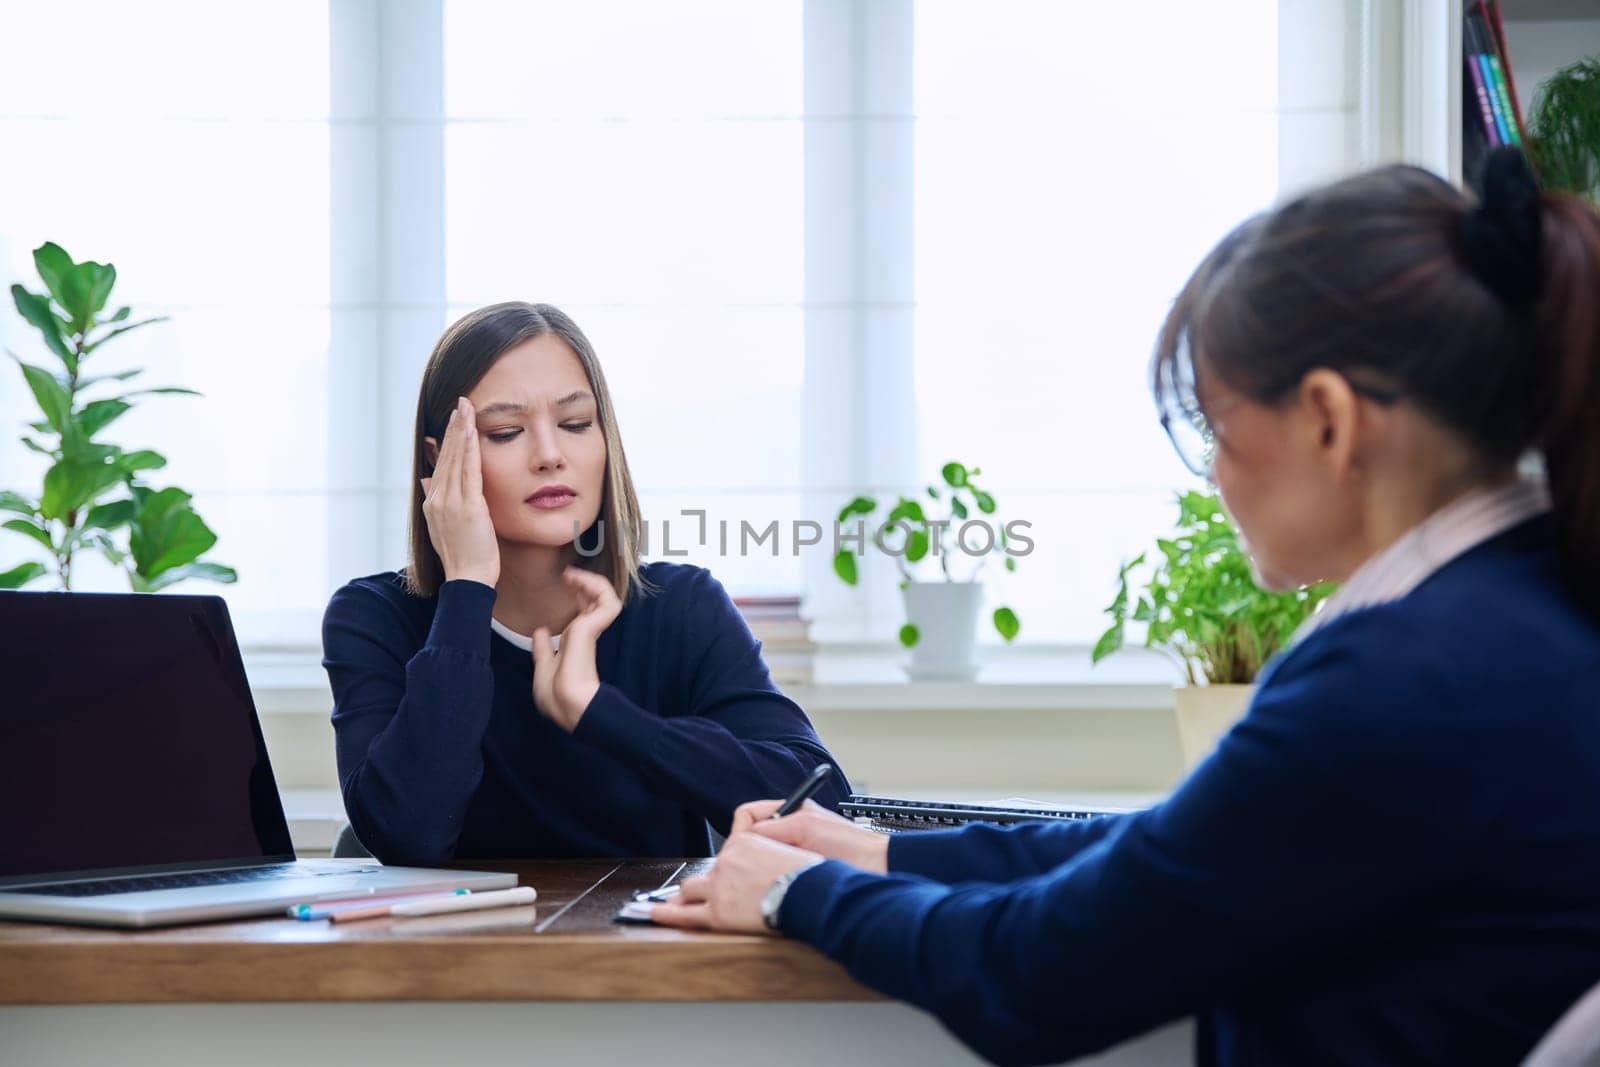 Sad unhappy young woman patient at session with female psychologist therapist social worker counselor psychotherapist. Mental health professional support treatment, feelings stress depression trauma